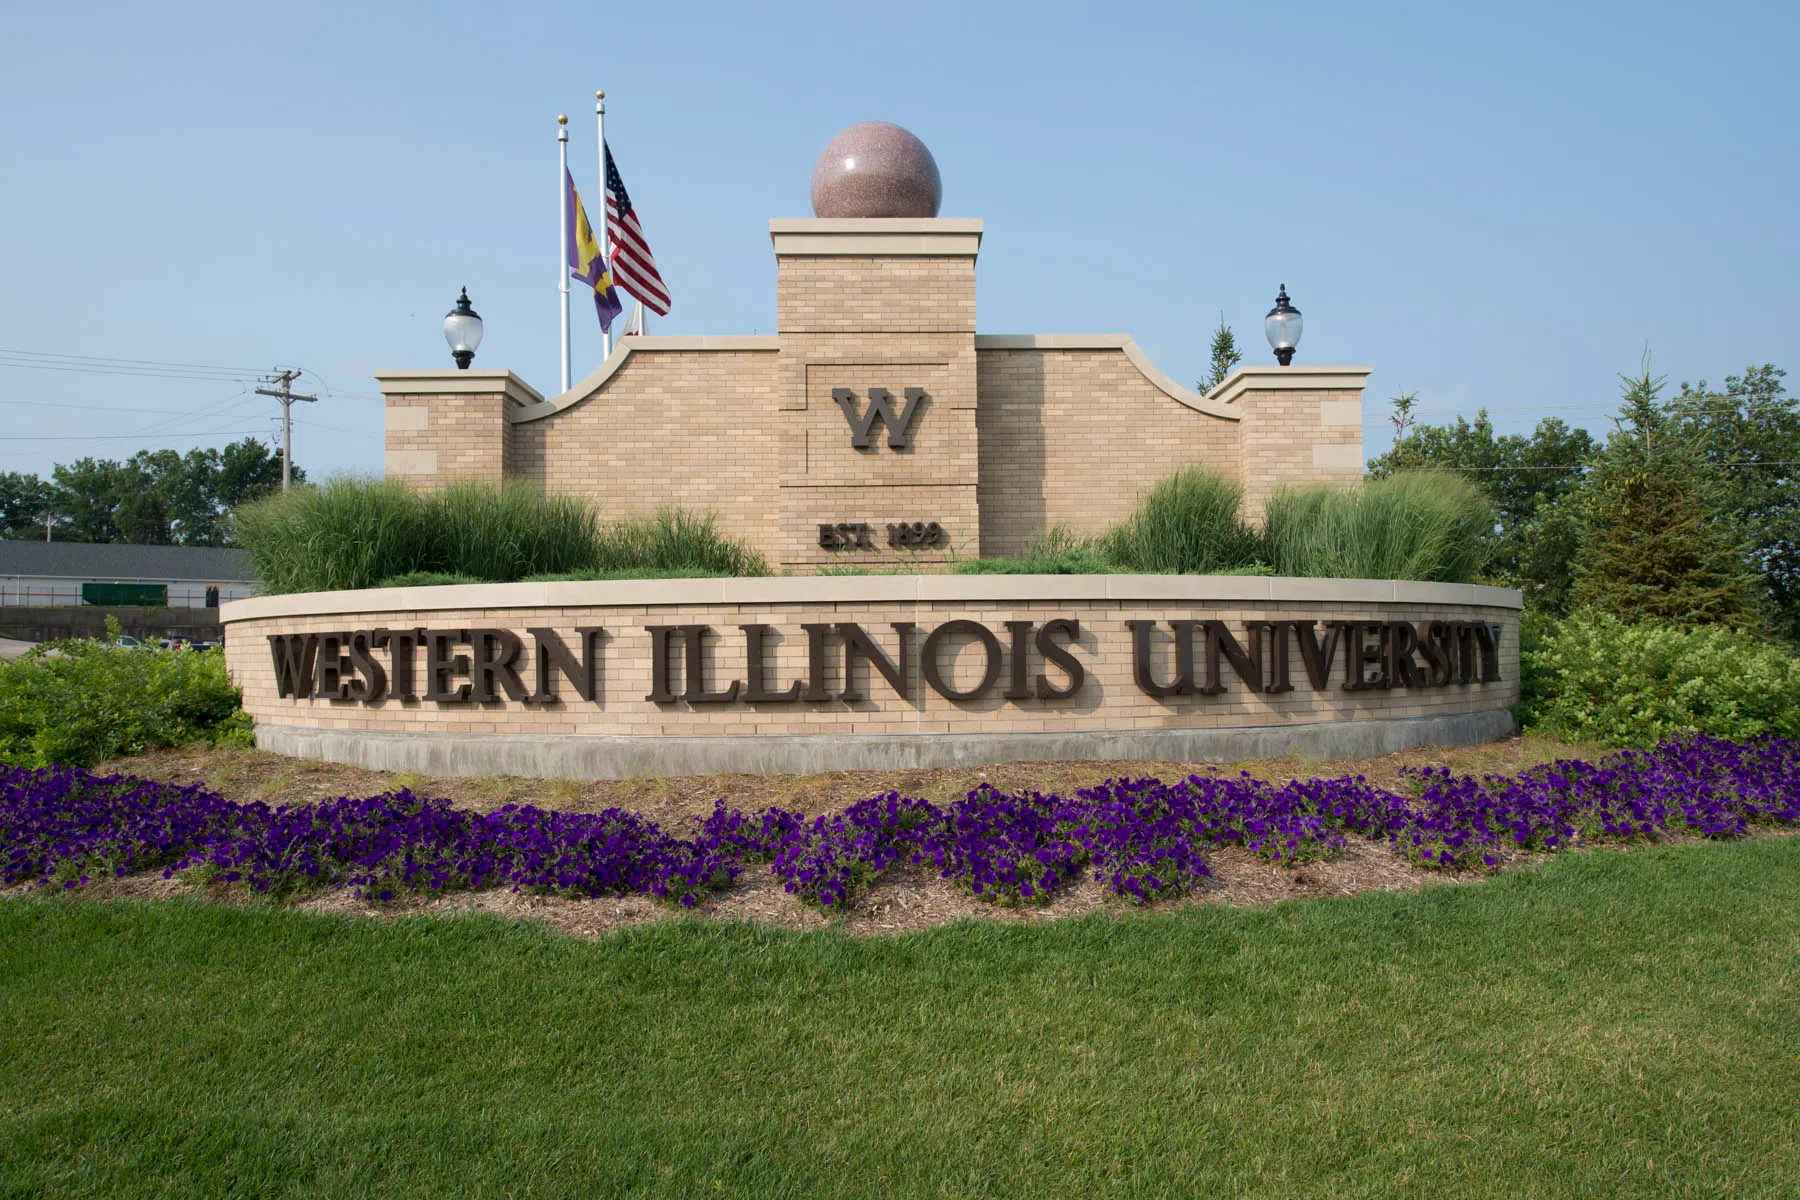 WIU Keeping Tuition, Room And Board Costs Flat